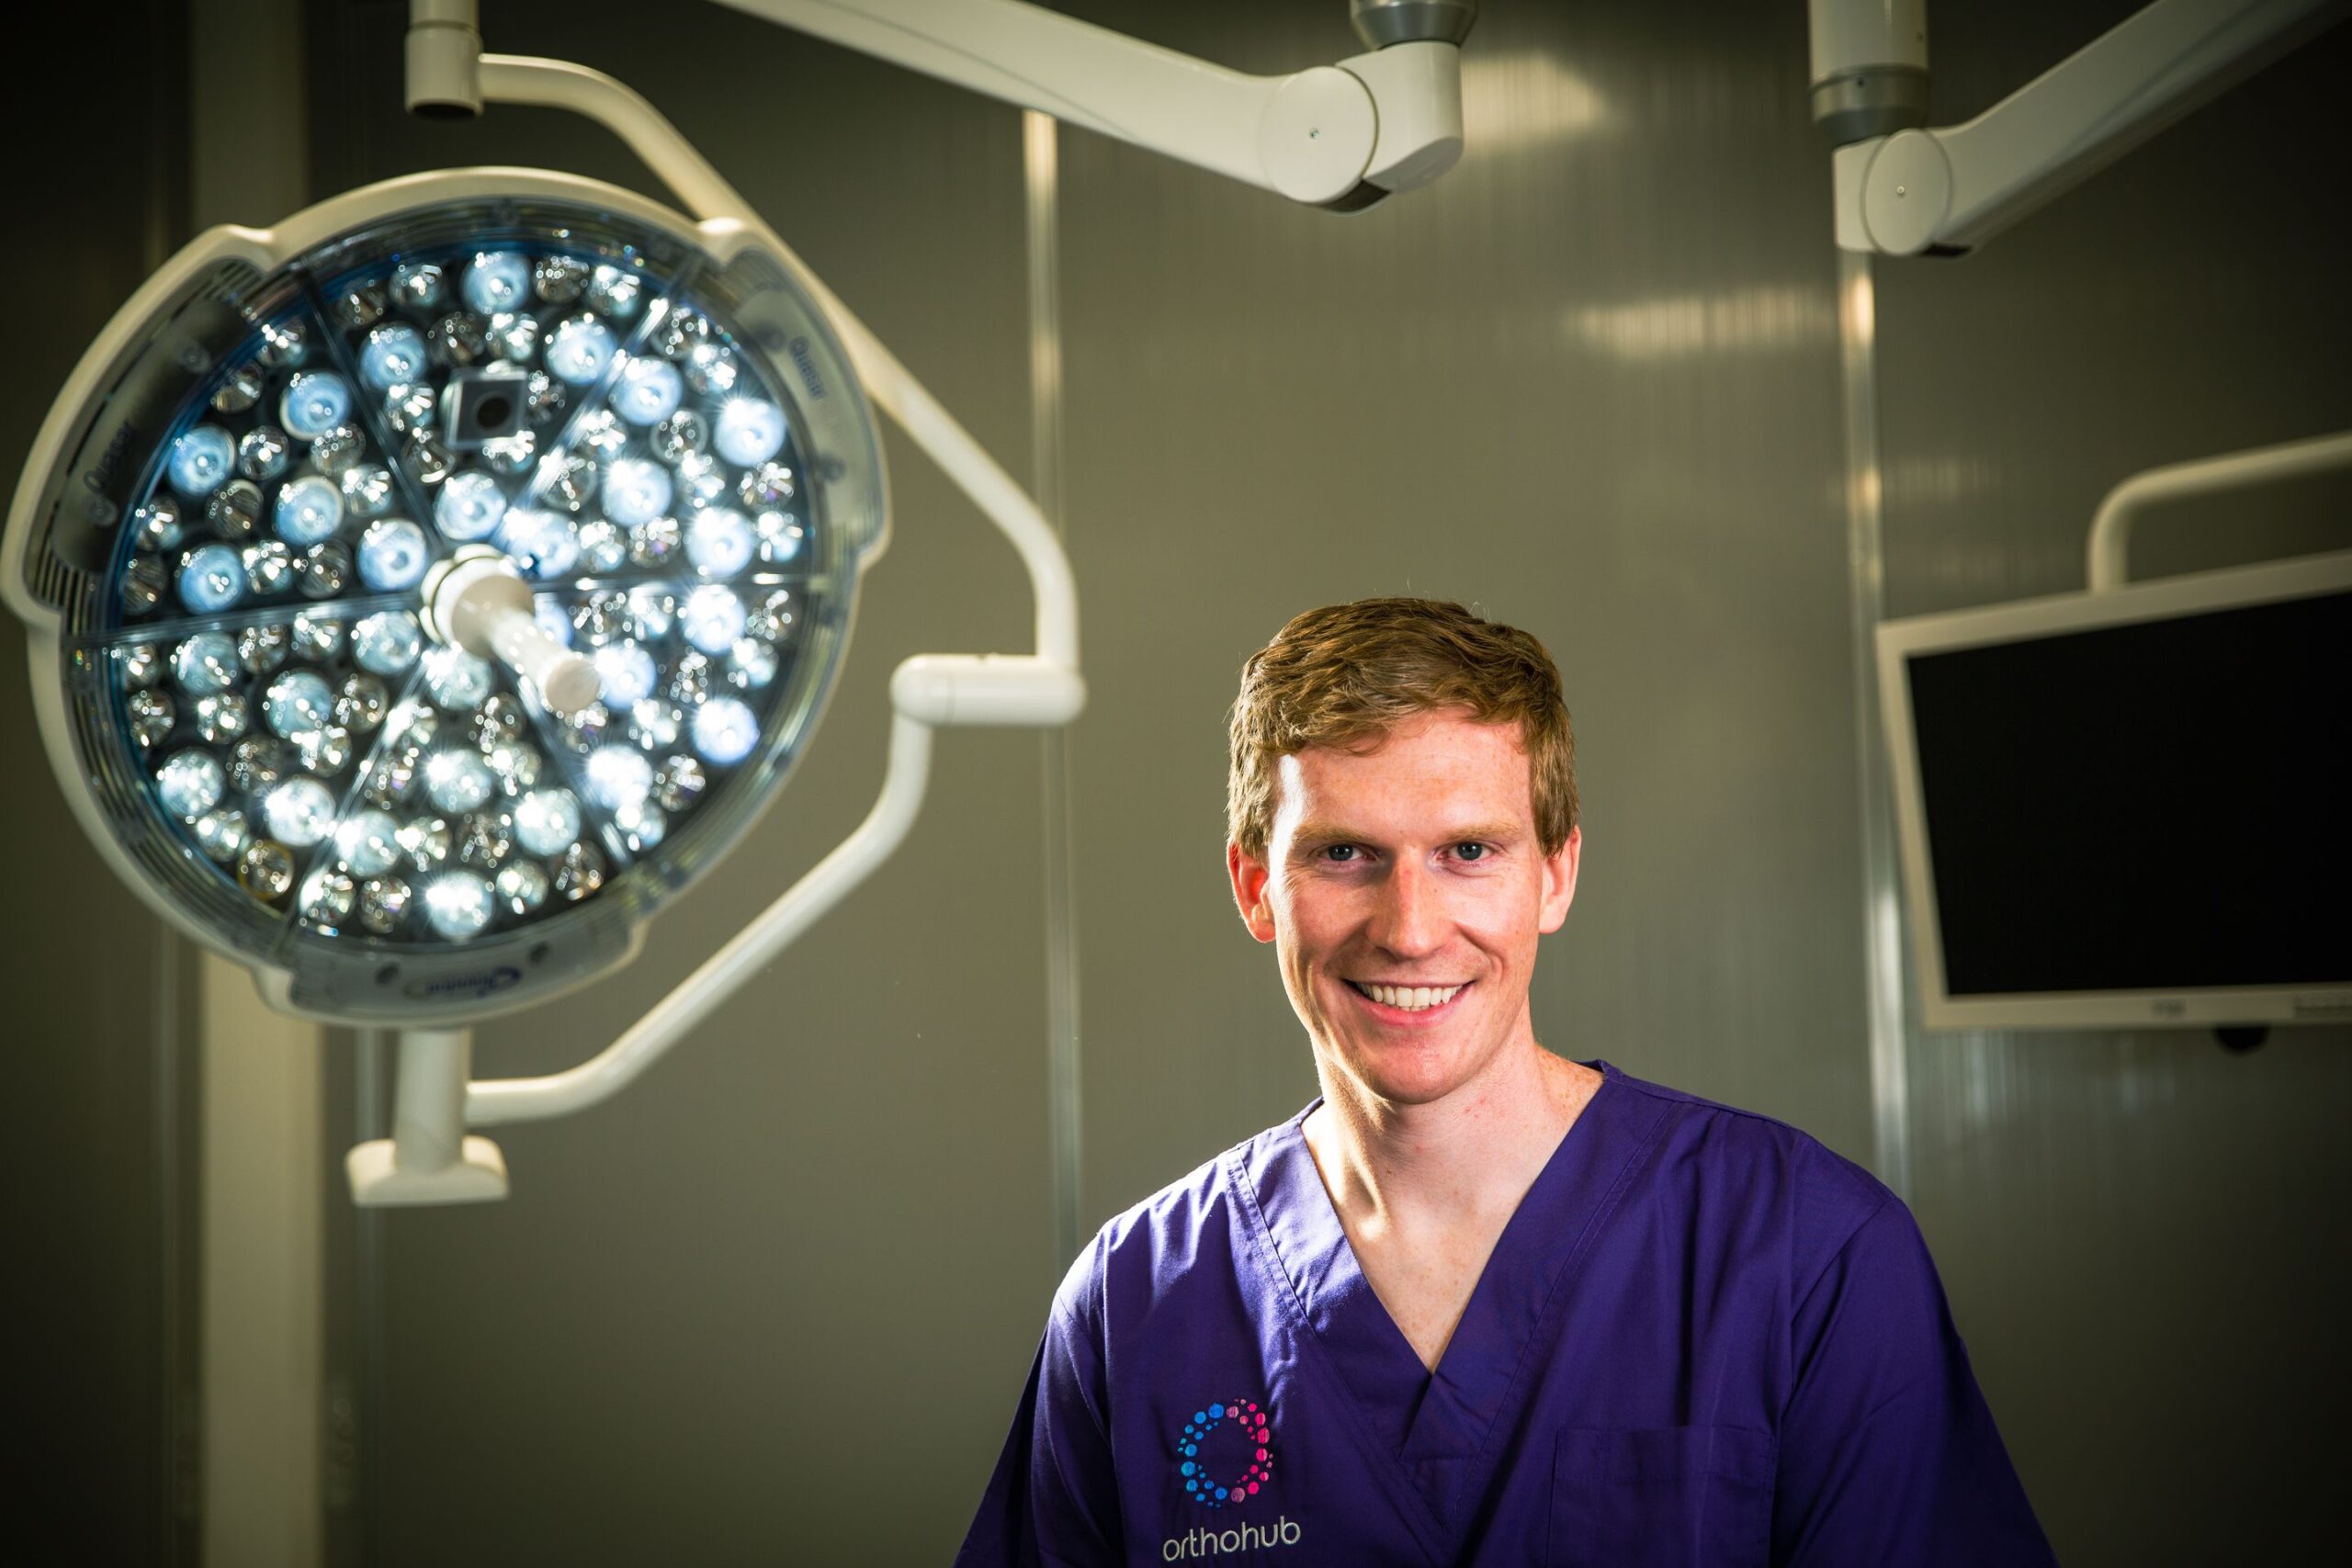 Mike Barrett - Cambridge Foot and Ankle Surgeon